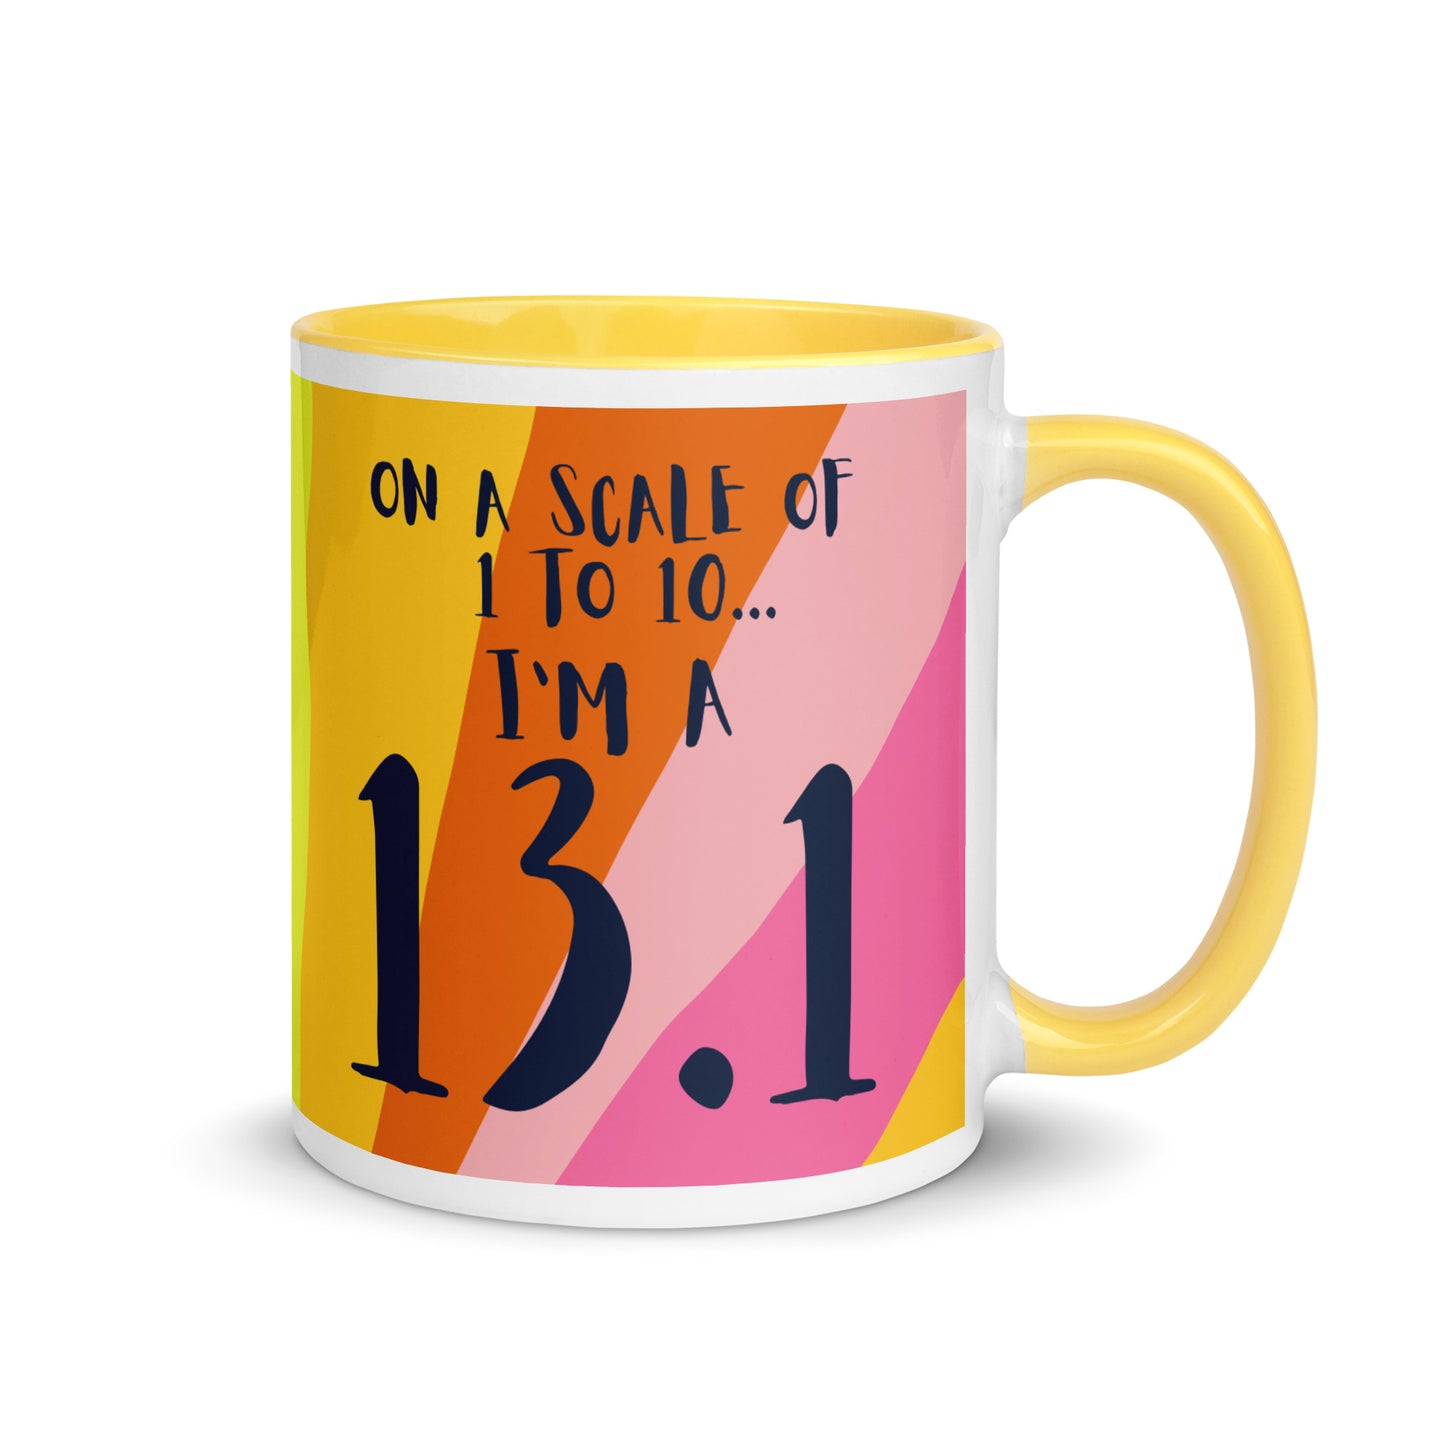 yellow rimmed and handled mug with a colourful sun ray style design and the words on a scale of 1 to 10 I'm a 13.1. A gift for half marathon runners